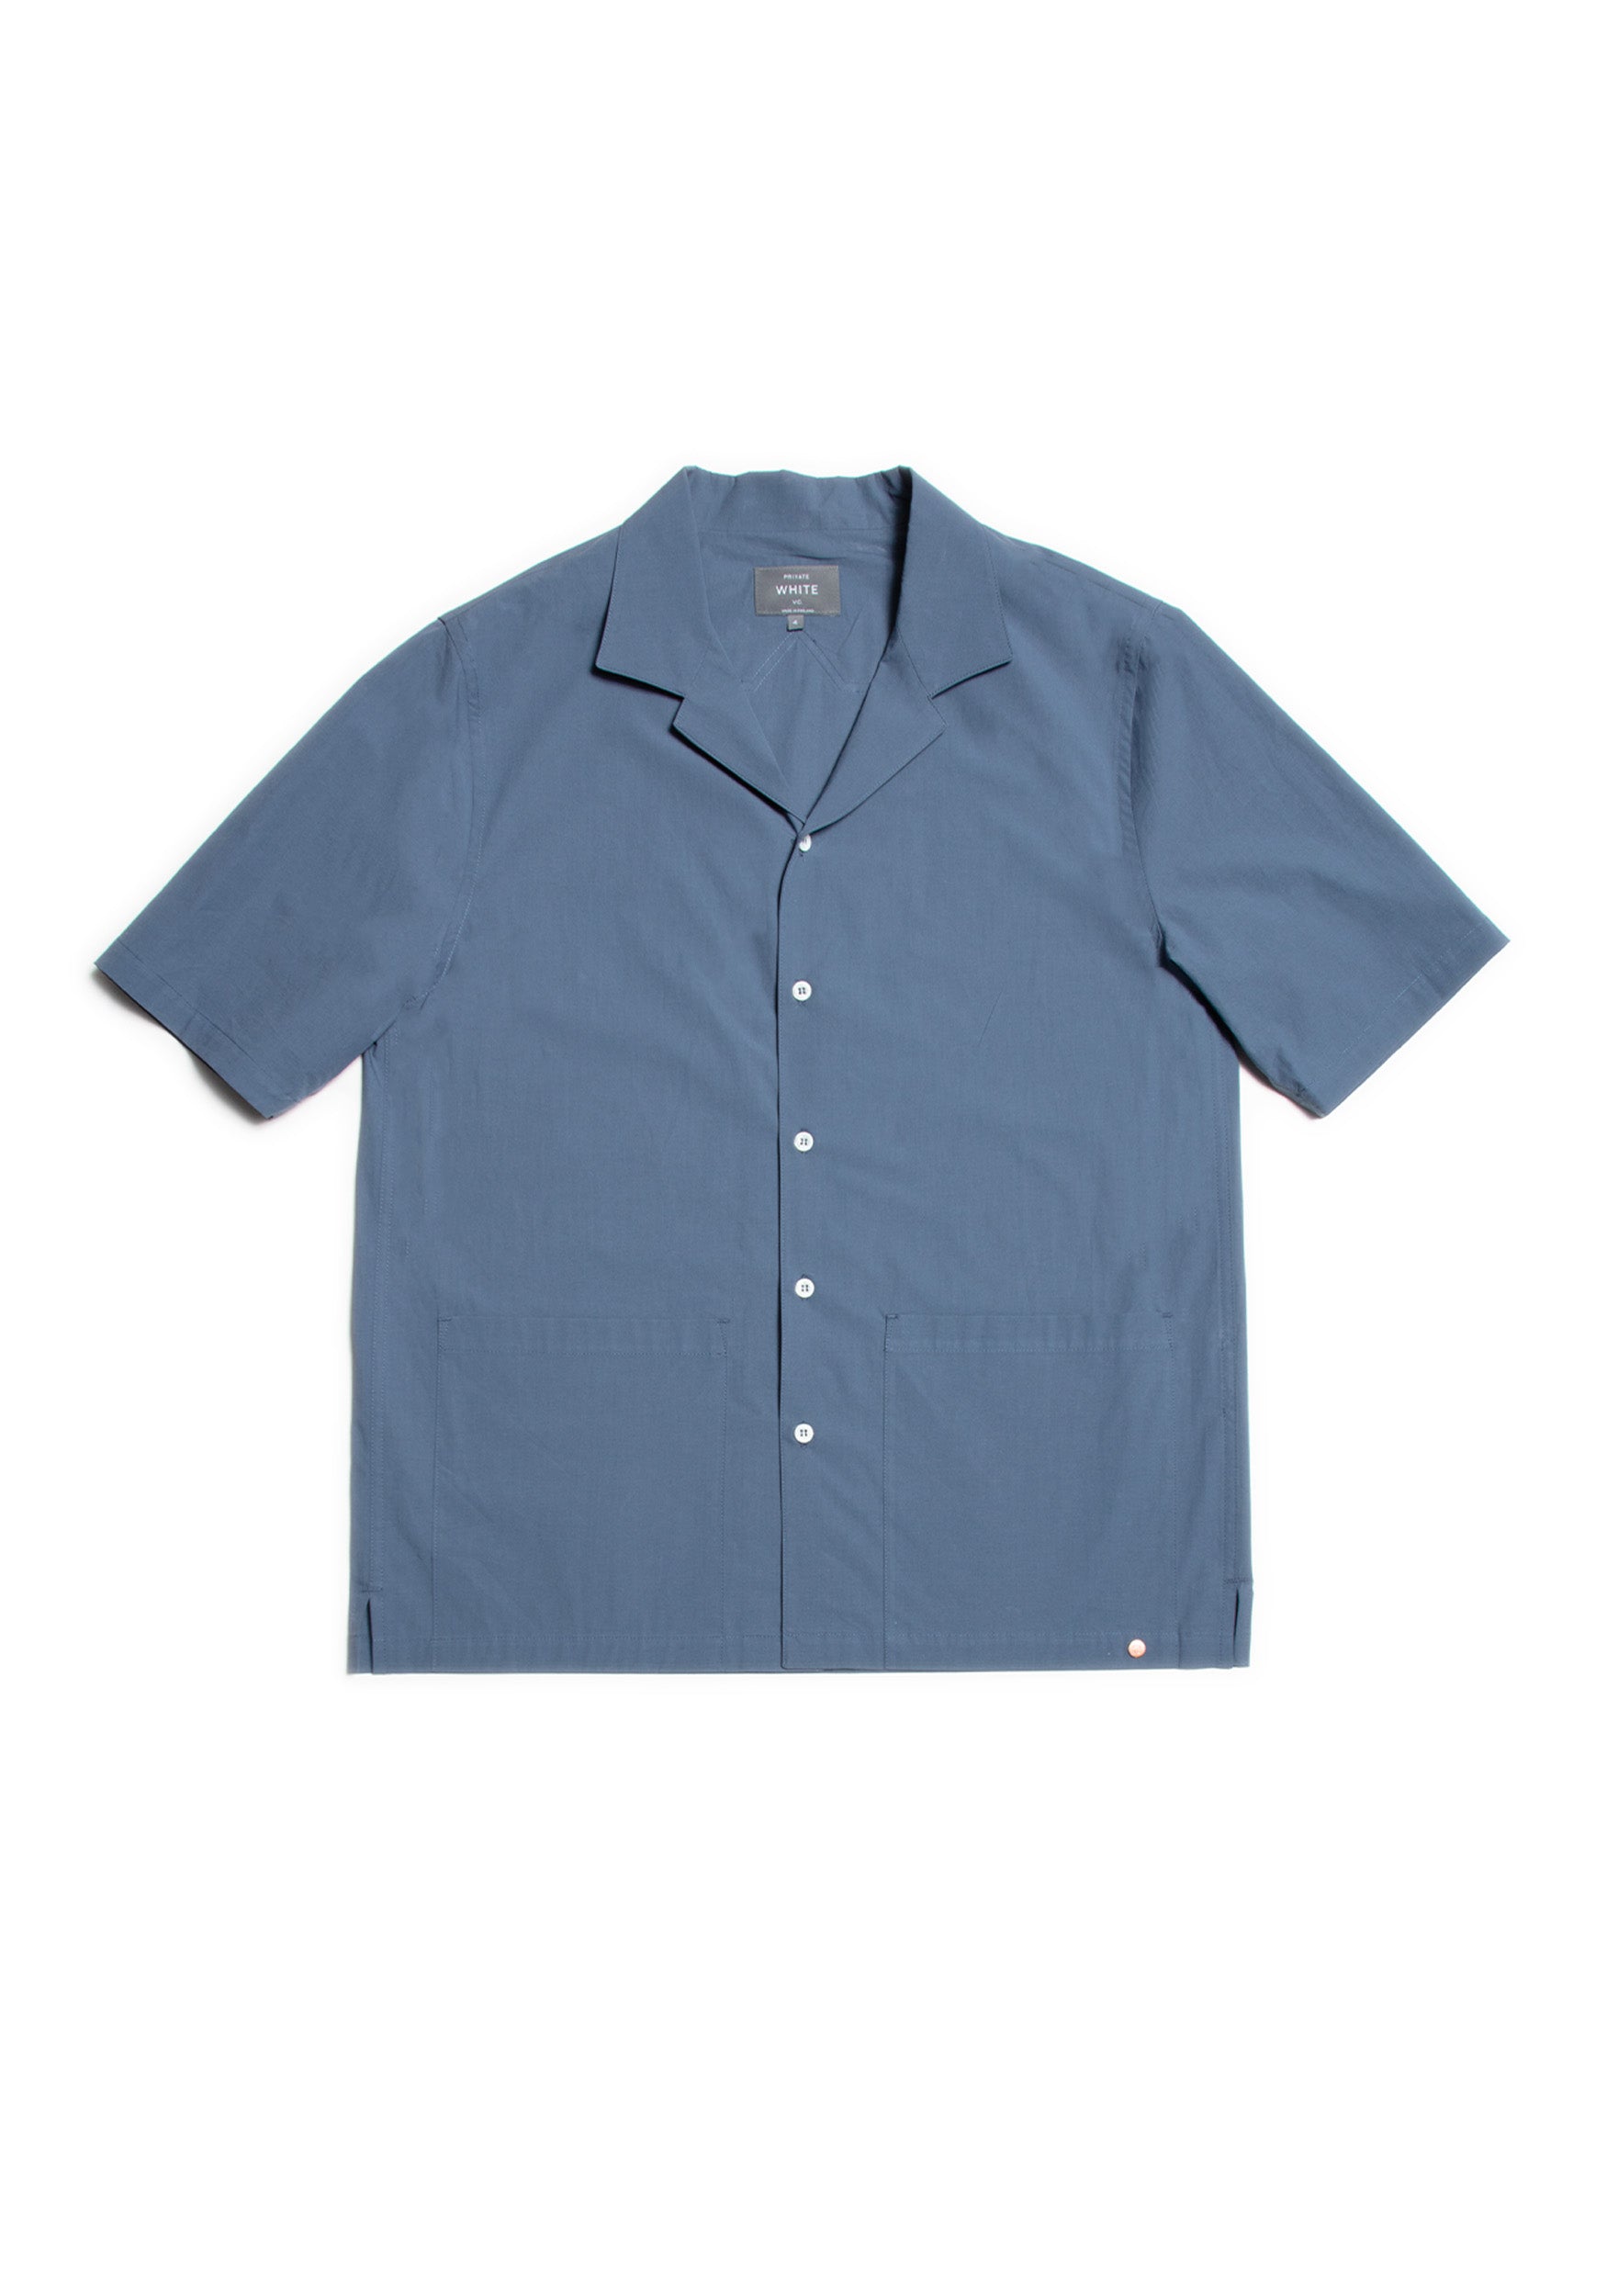 The Flyweight Camp Collar Shirt – PrivateWhite V.C.